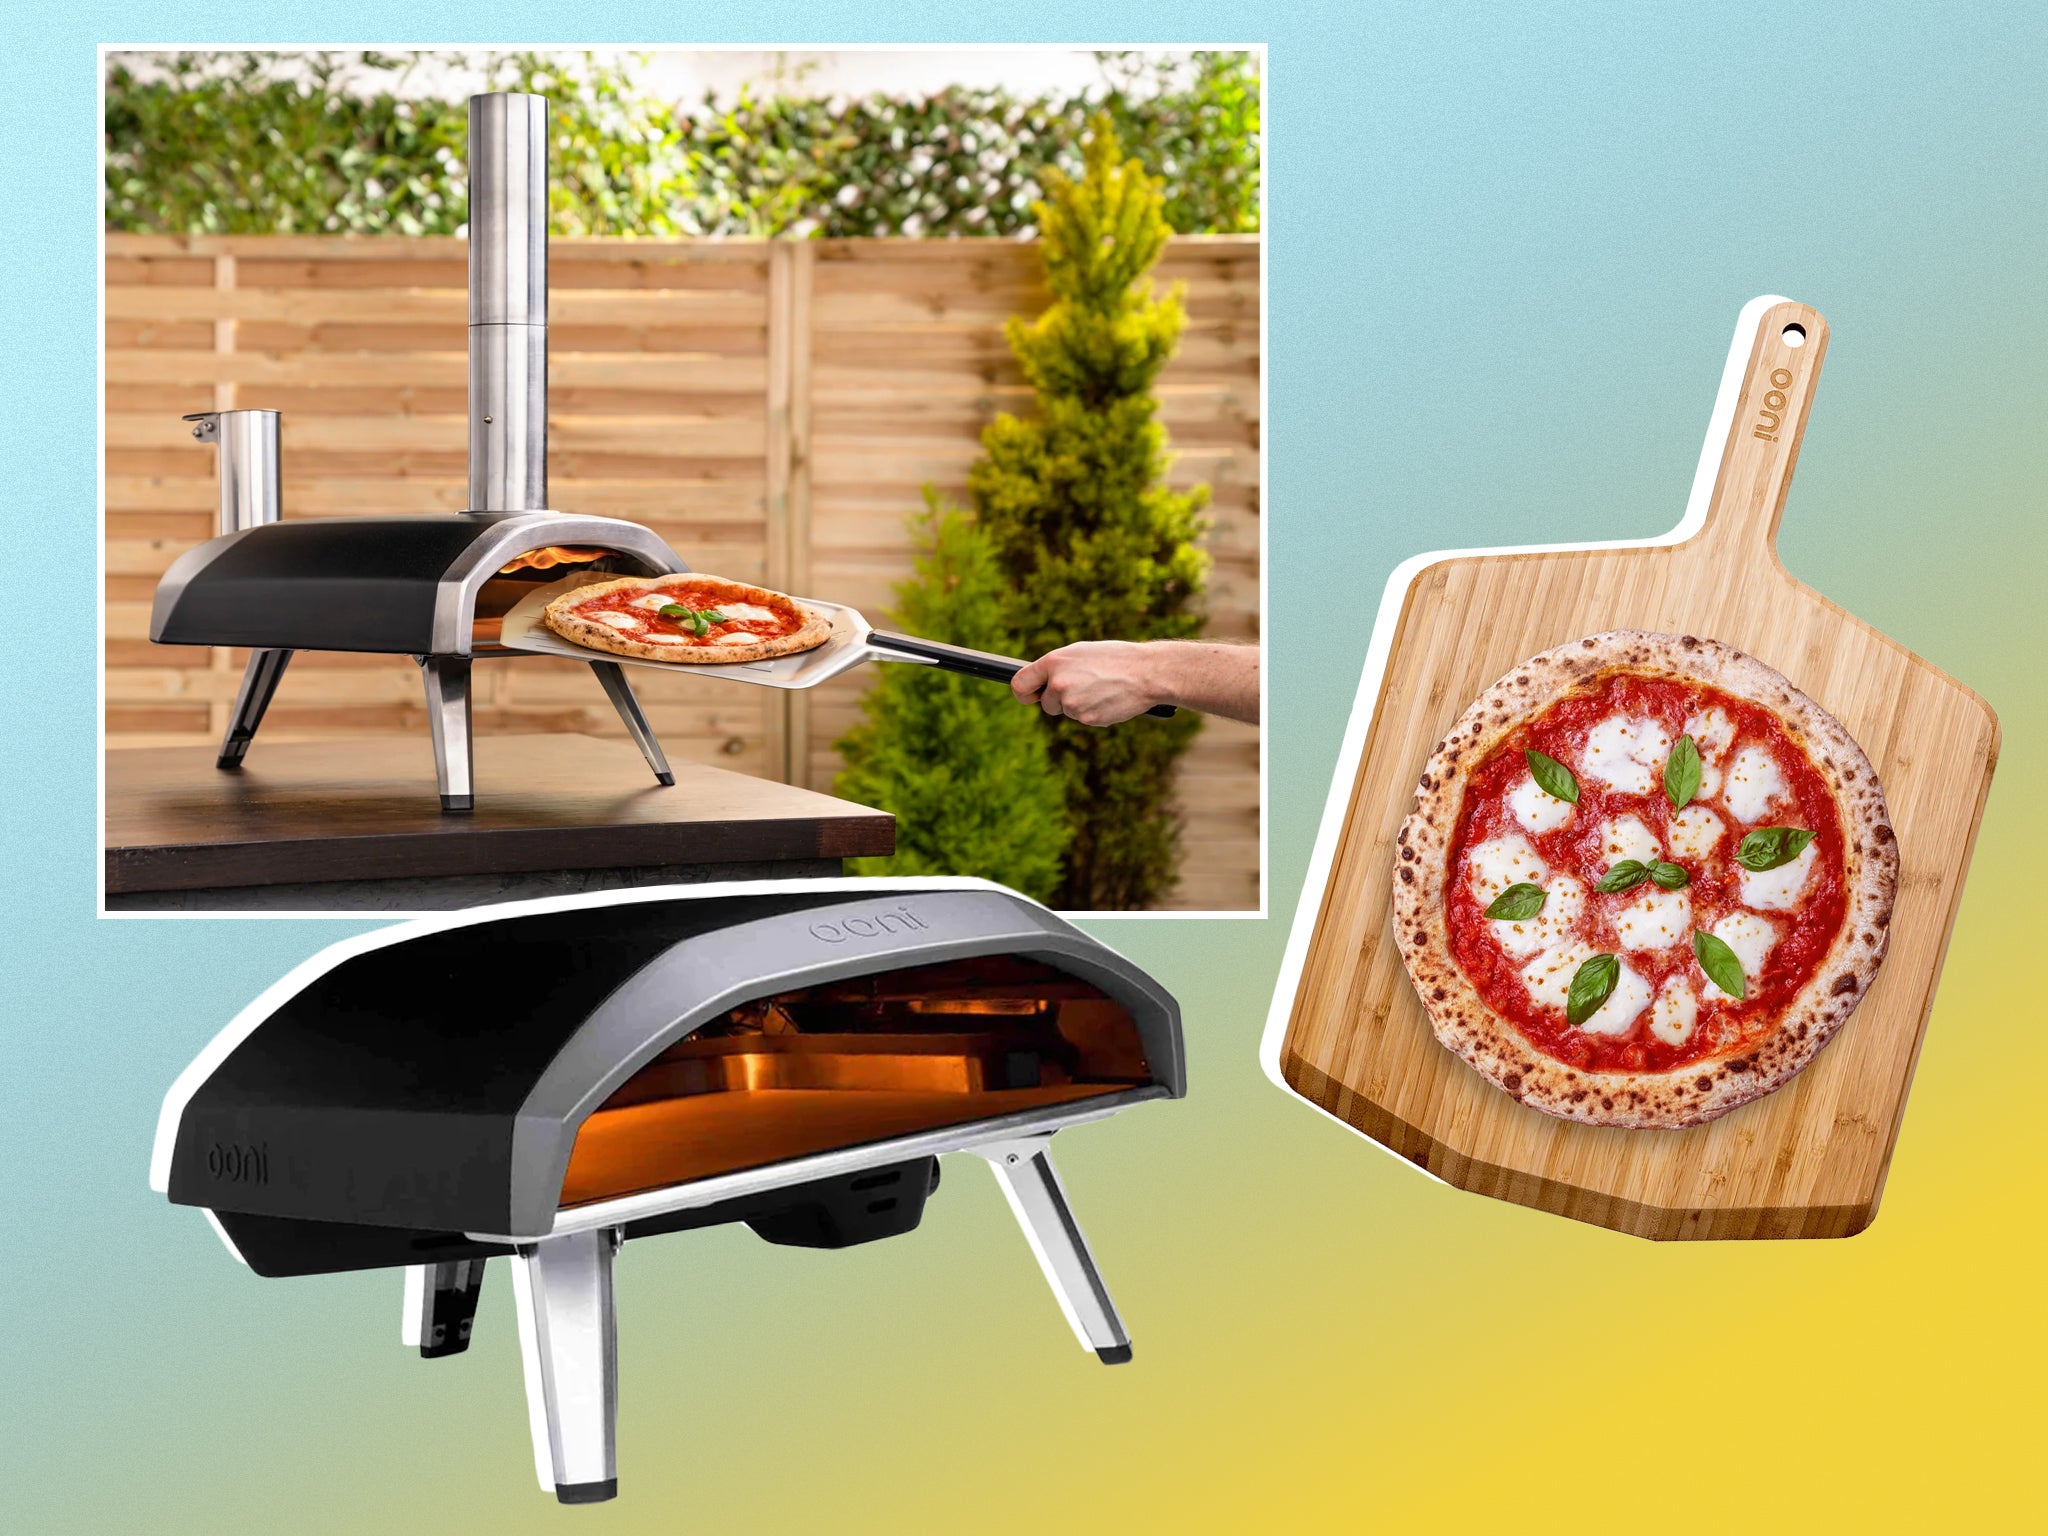 Save your dough on these impressive outdoor ovens and pizza bundles